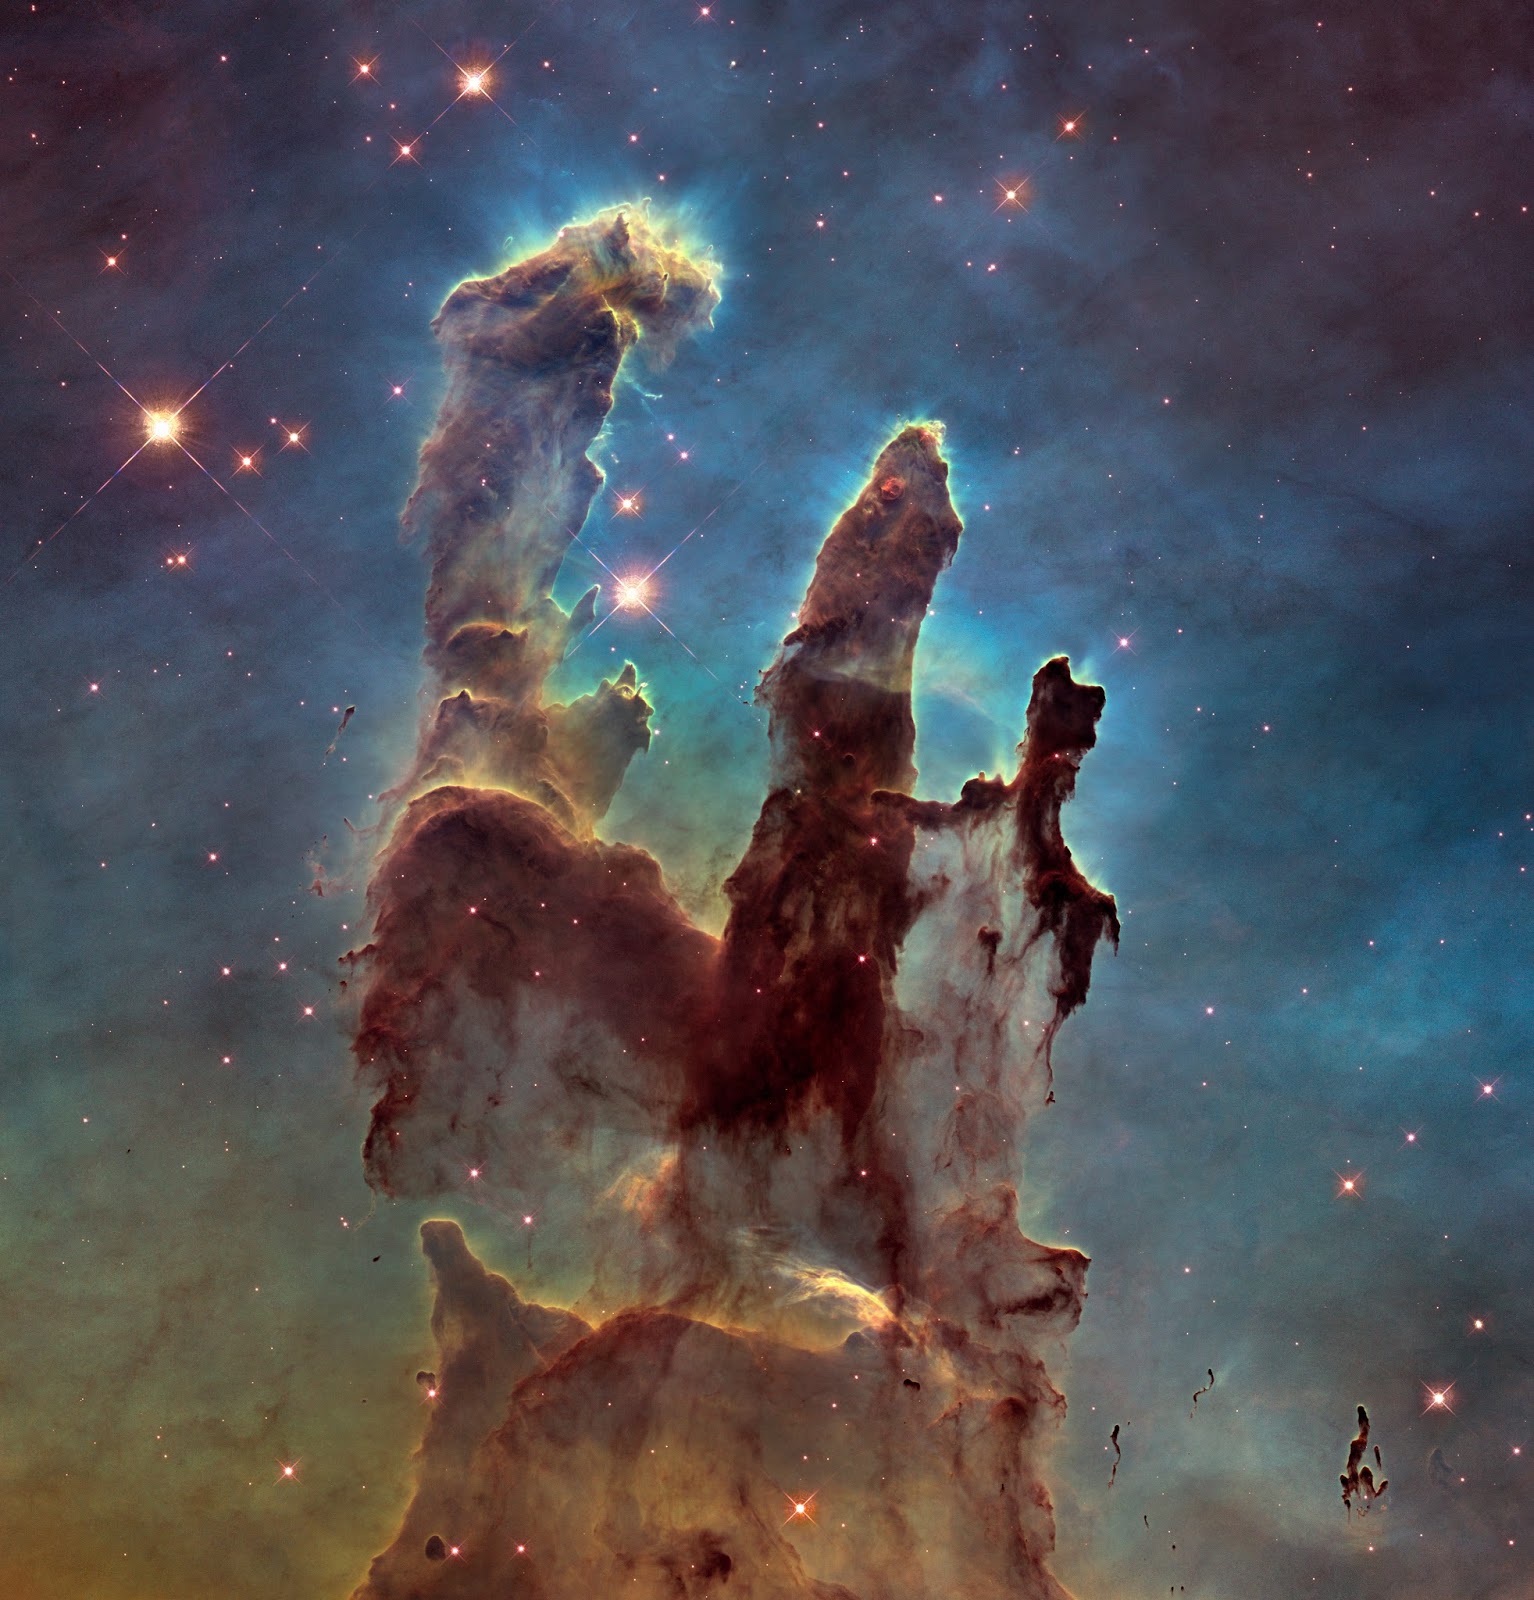 New view of the Pillars of Creation New view of the Pillars of Creation   The NASA/ESA Hubble Space Telescope has revisited one of its most iconic and popular images: the Eagle Nebula’s Pillars of Creation. This image shows the pillars as seen in visible light, capturing the multi-coloured glow of gas clouds, wispy tendrils of dark cosmic dust, and the rust-coloured elephants’ trunks of the nebula’s famous pillars.  The dust and gas in the pillars is seared by the intense radiation from young stars and eroded by strong winds from massive nearby stars. With these new images comes better contrast and a clearer view for astronomers to study how the structure of the pillars is changing over time.  Image Credit: NASA, ESA/Hubble and the Hubble Heritage Team Explanation from: http://www.spacetelescope.org/images/heic1501a/